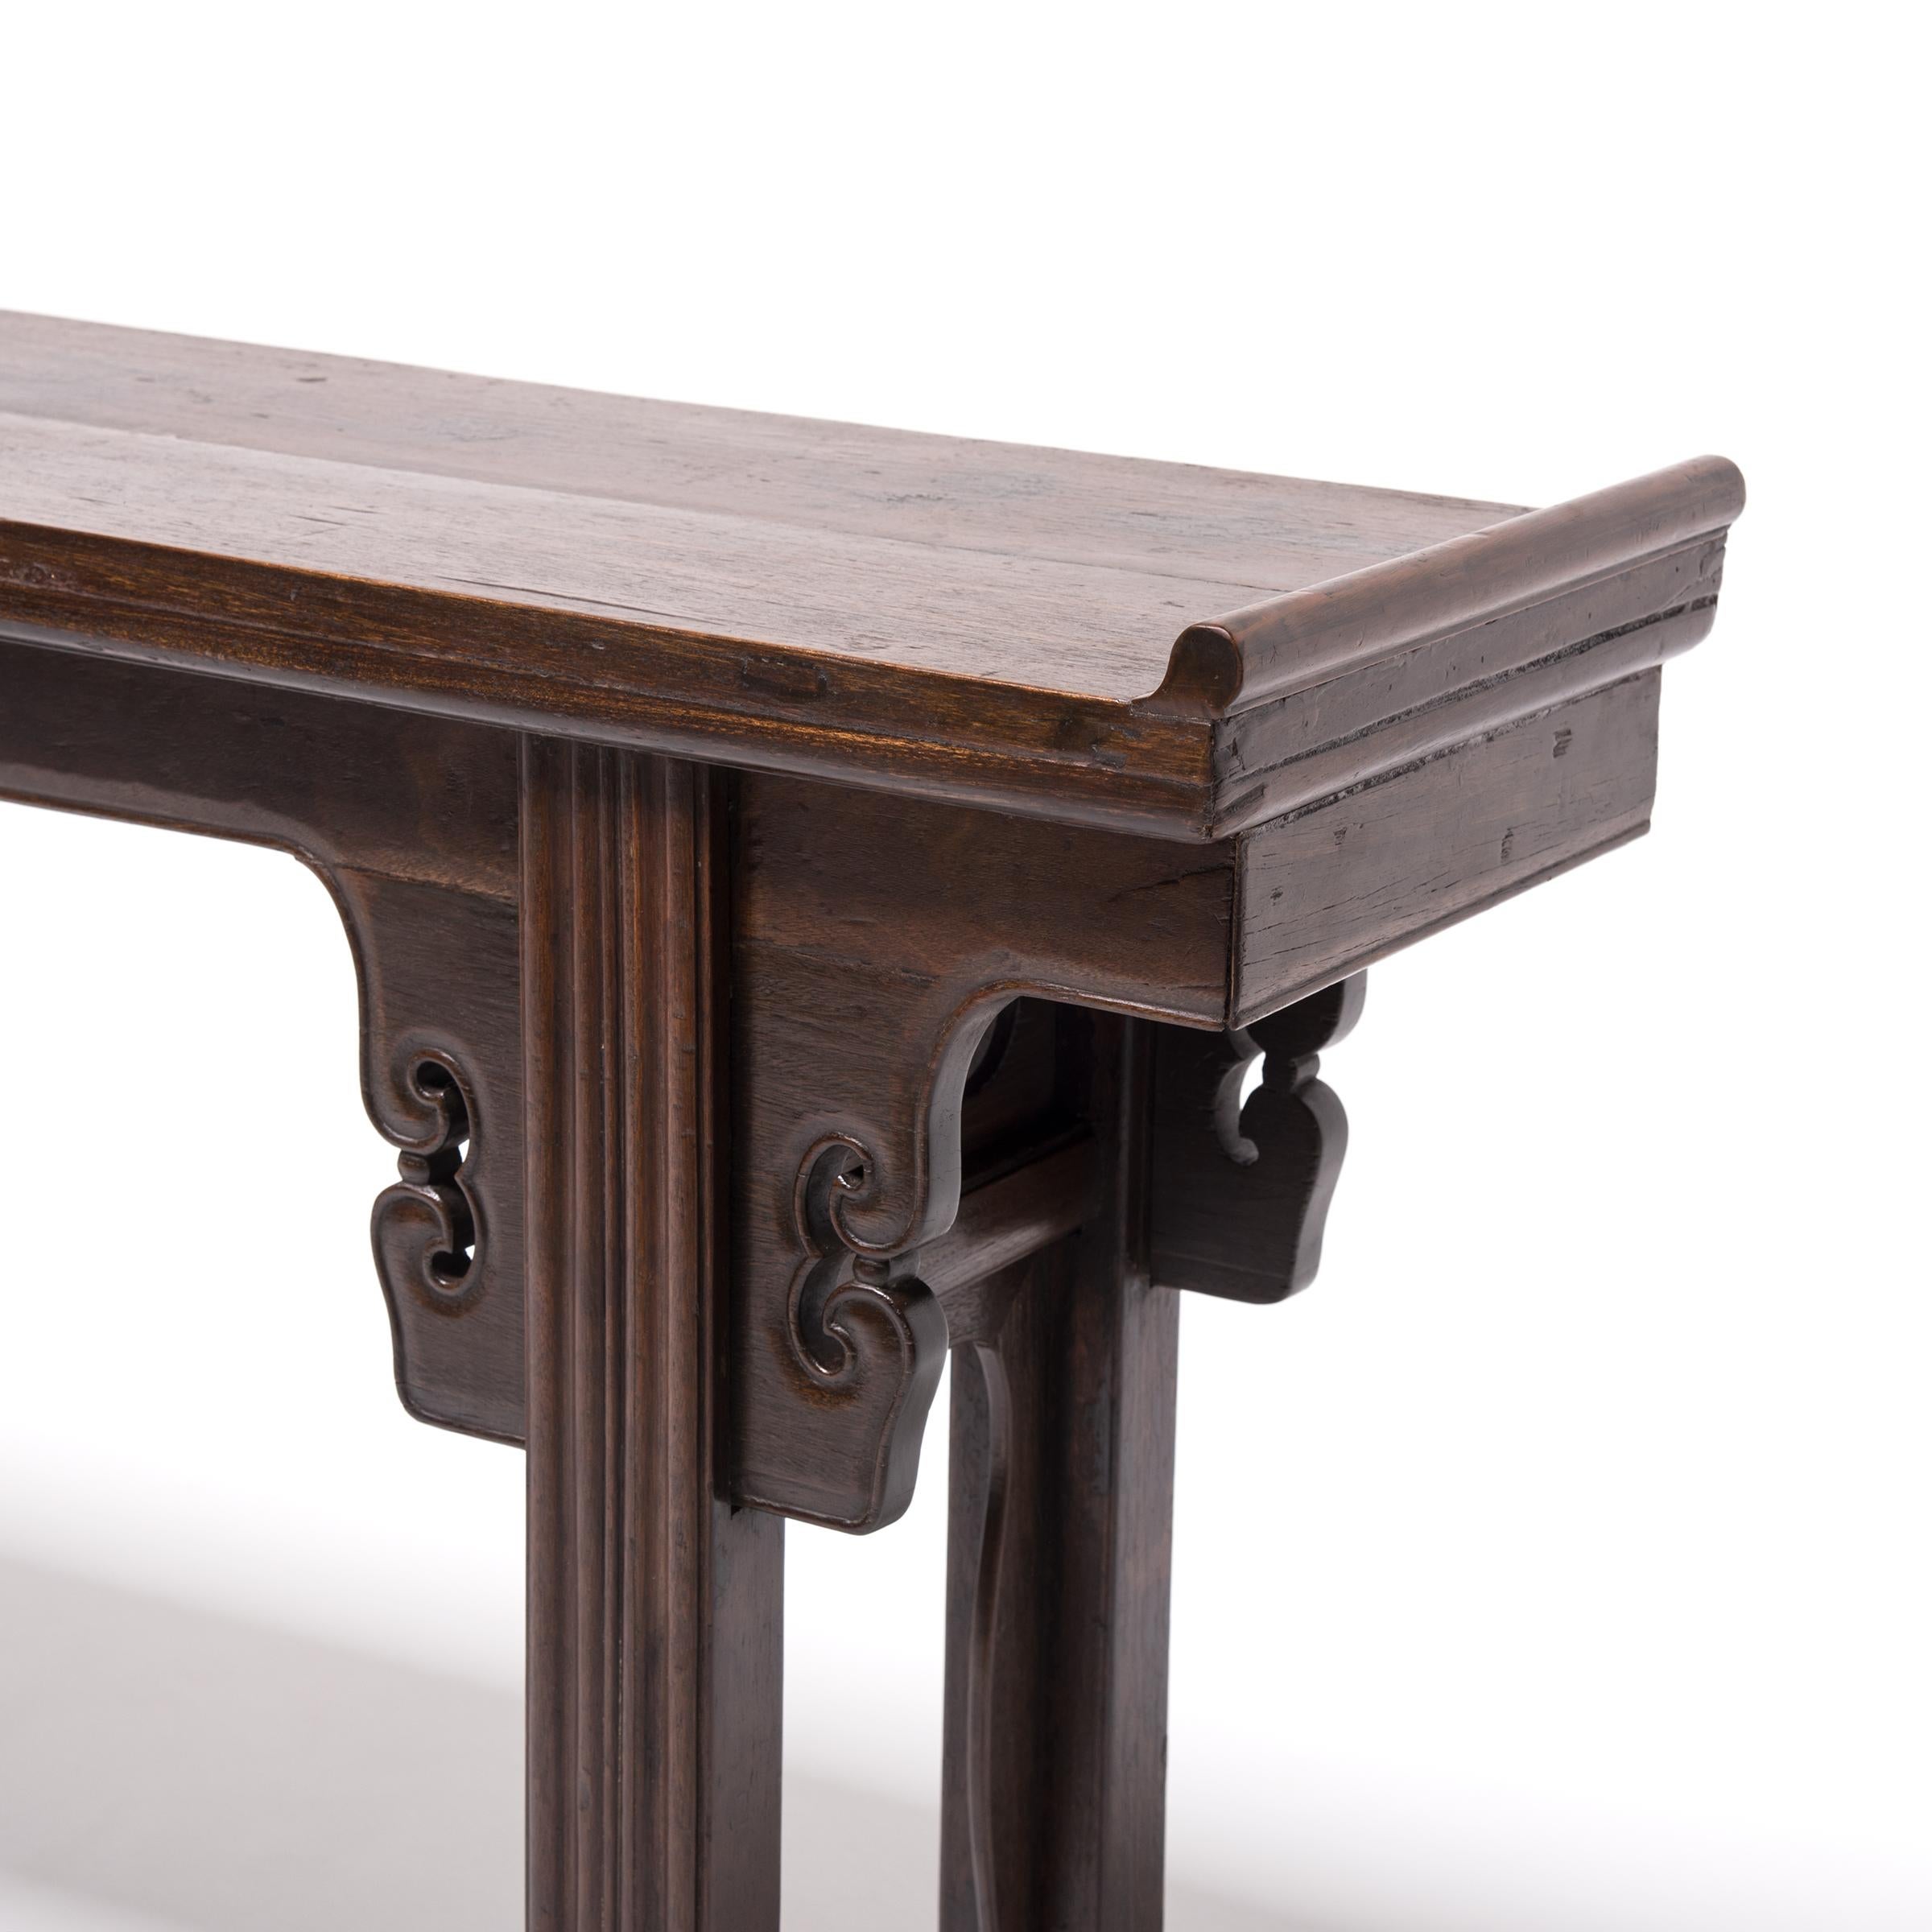 Chinese Altar Table with Everted Ends, c. 1850 In Good Condition For Sale In Chicago, IL